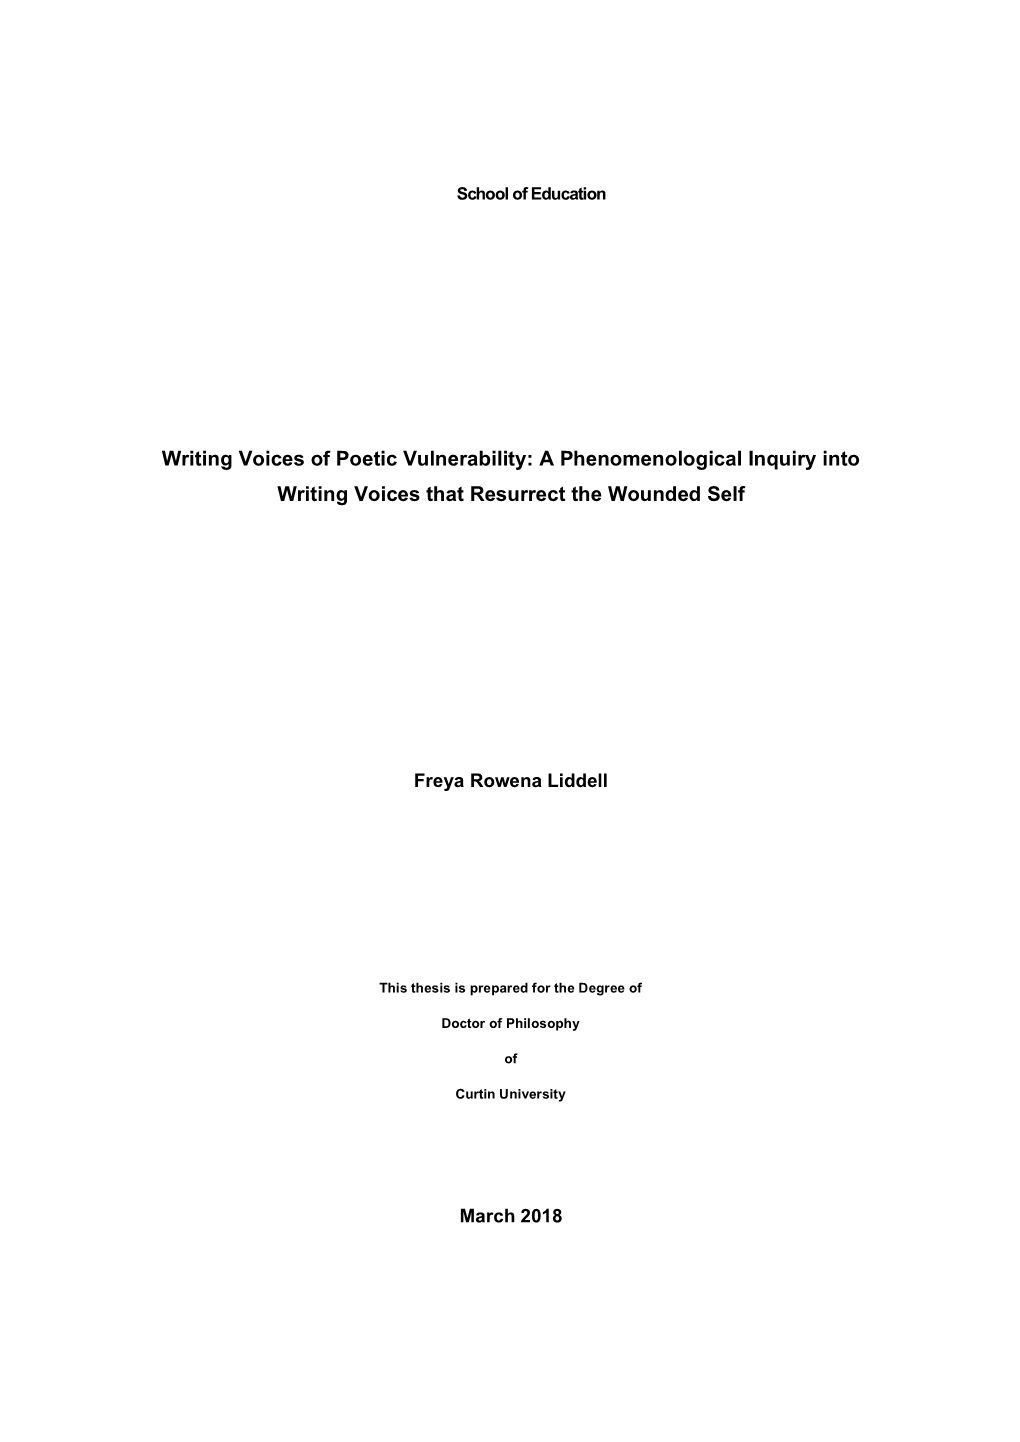 Writing Voices of Poetic Vulnerability: a Phenomenological Inquiry Into Writing Voices That Resurrect the Wounded Self